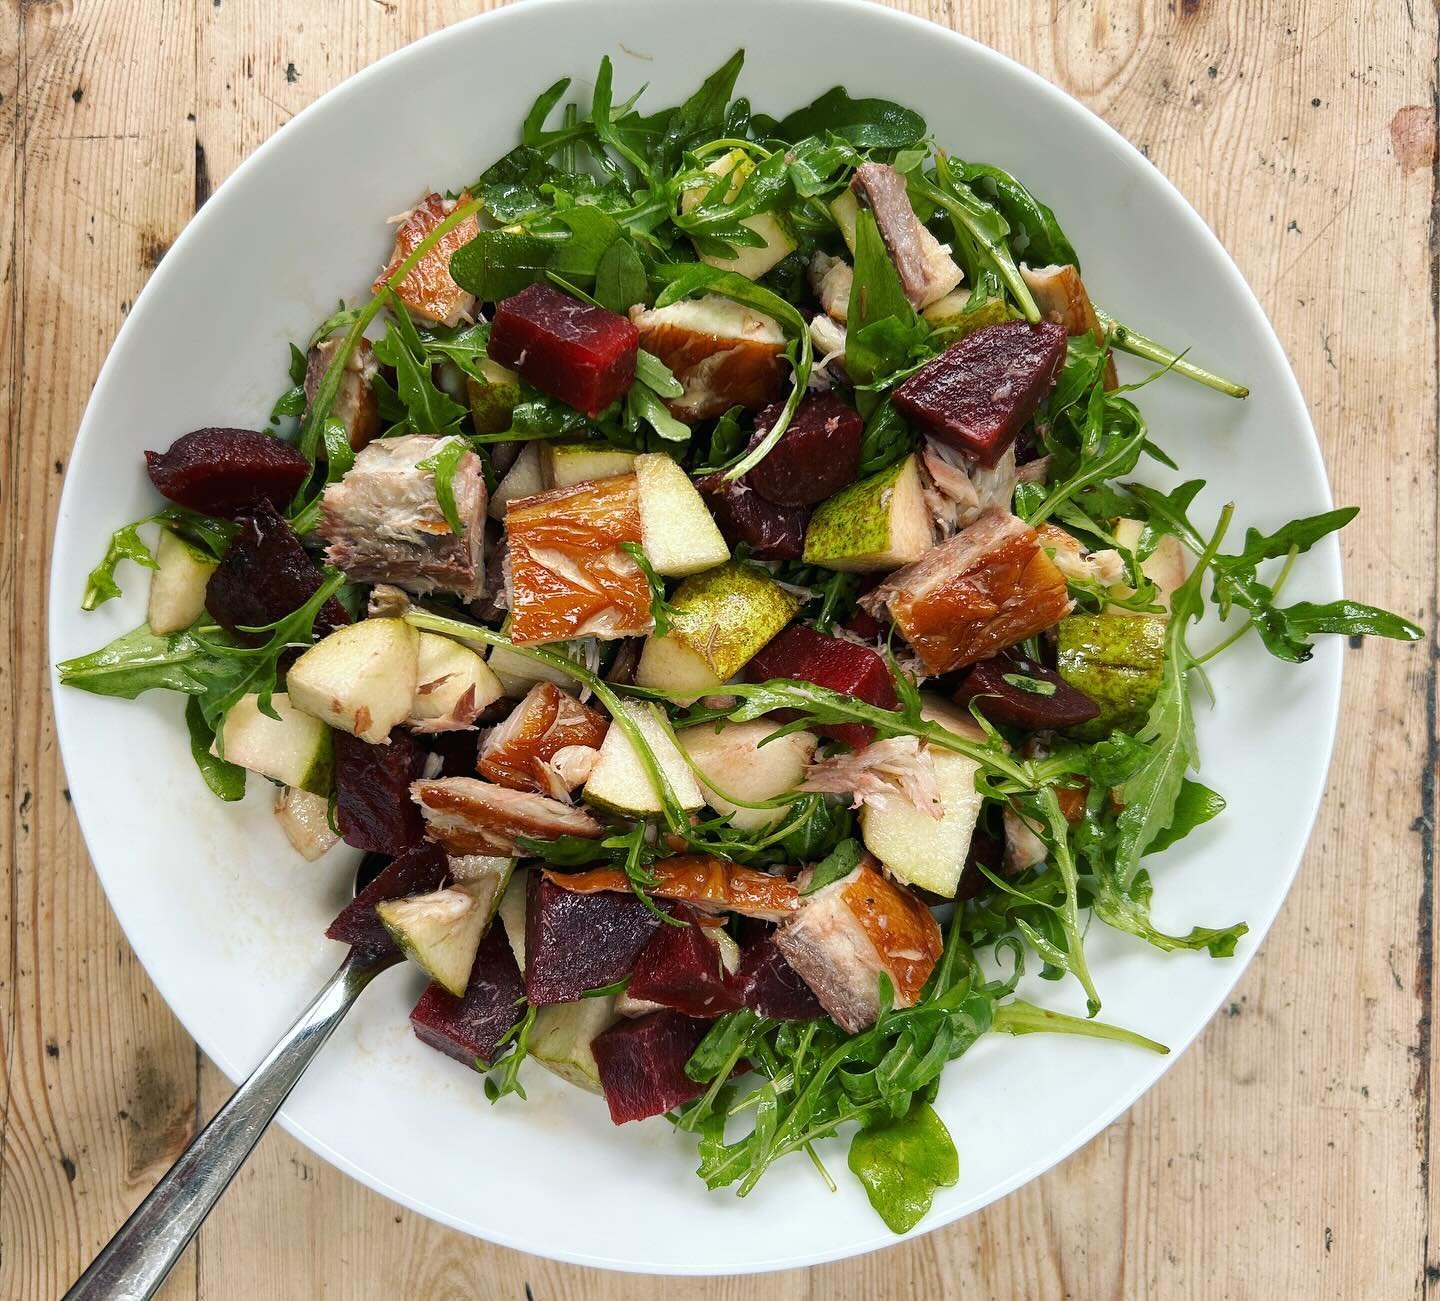 I&rsquo;ve been meaning to share this delicious salad suggestion for days, but keep forgetting 🤦&zwj;♀️. Inspired by a conversation with one of my fabulous clients about adding fruit to savoury dishes, I happened to have a perfect selection of items